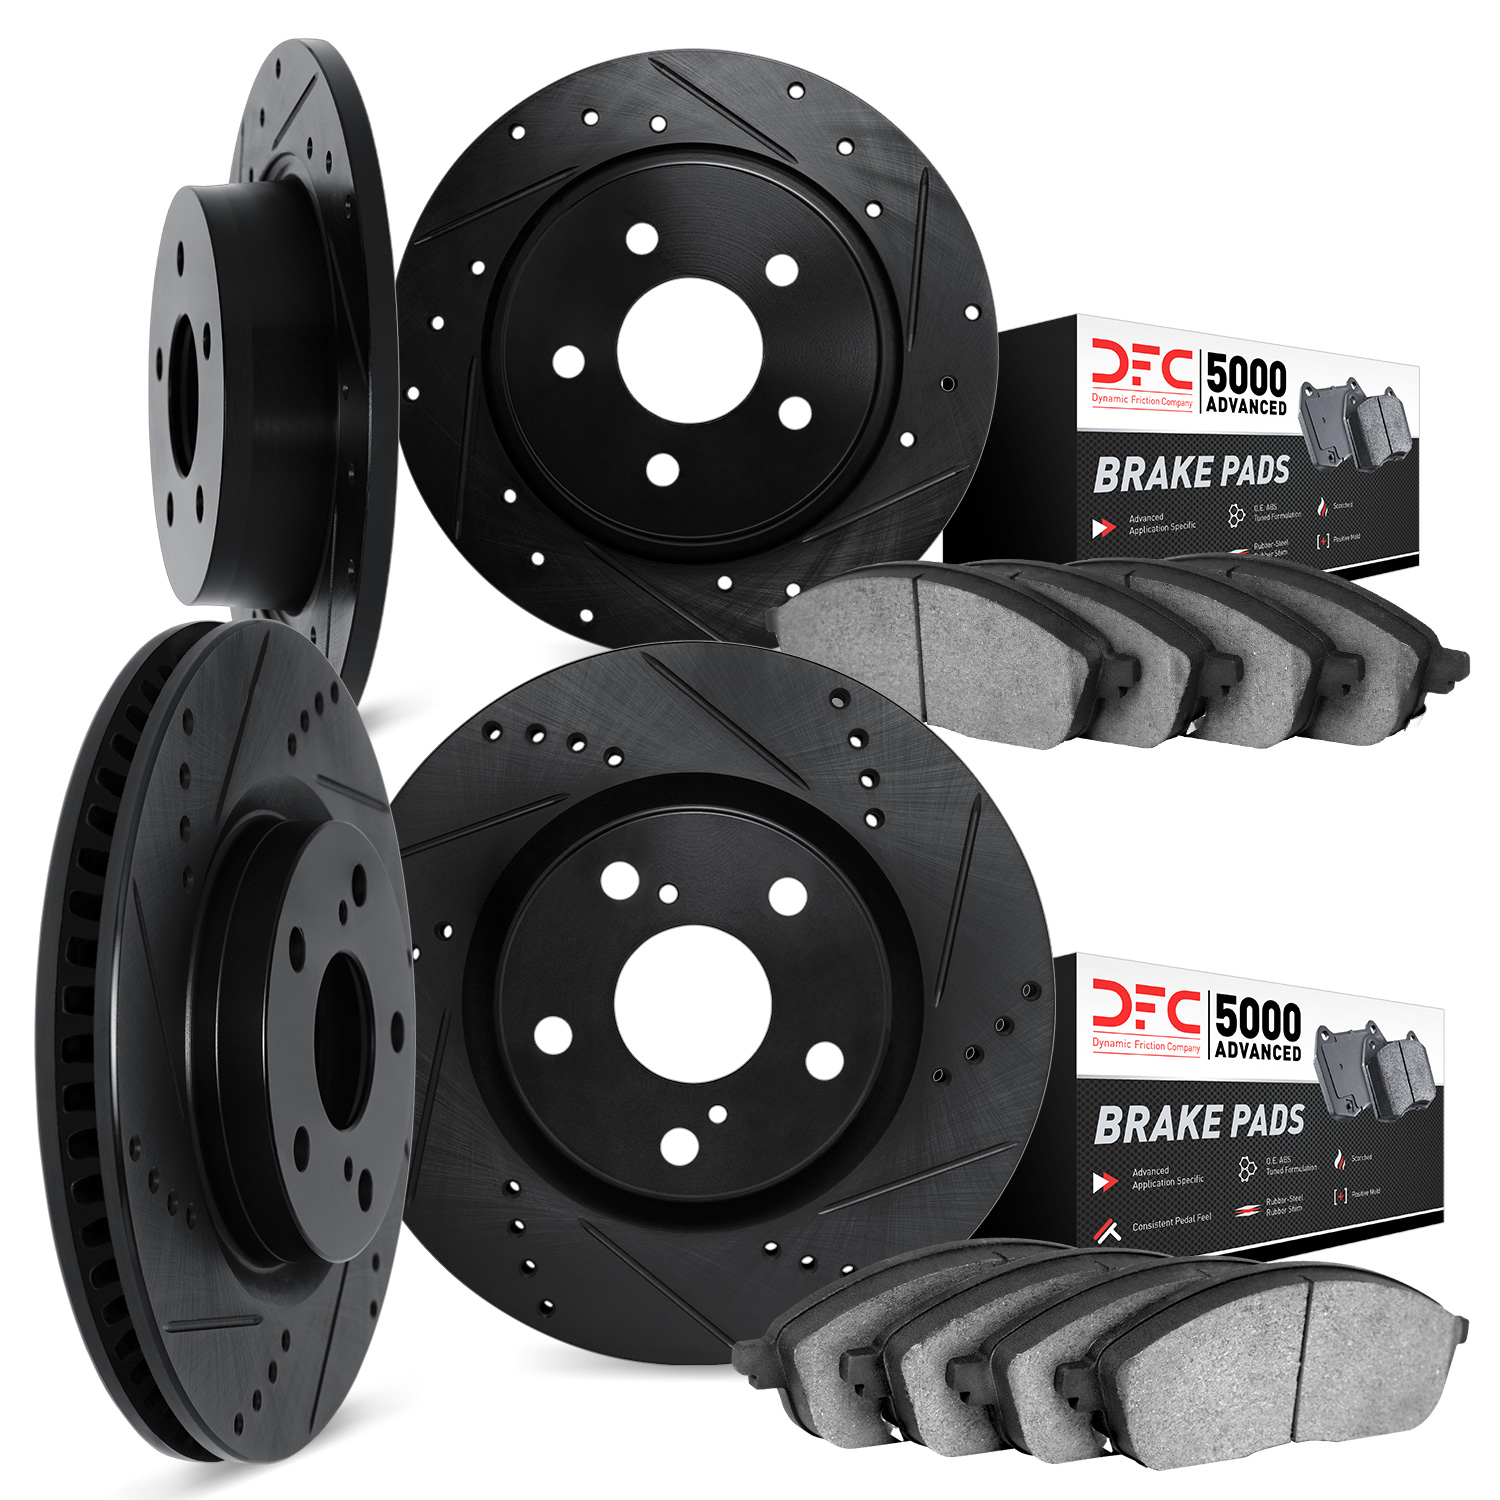 8504-54391 Drilled/Slotted Brake Rotors w/5000 Advanced Brake Pads Kit [Black], Fits Select Ford/Lincoln/Mercury/Mazda, Position